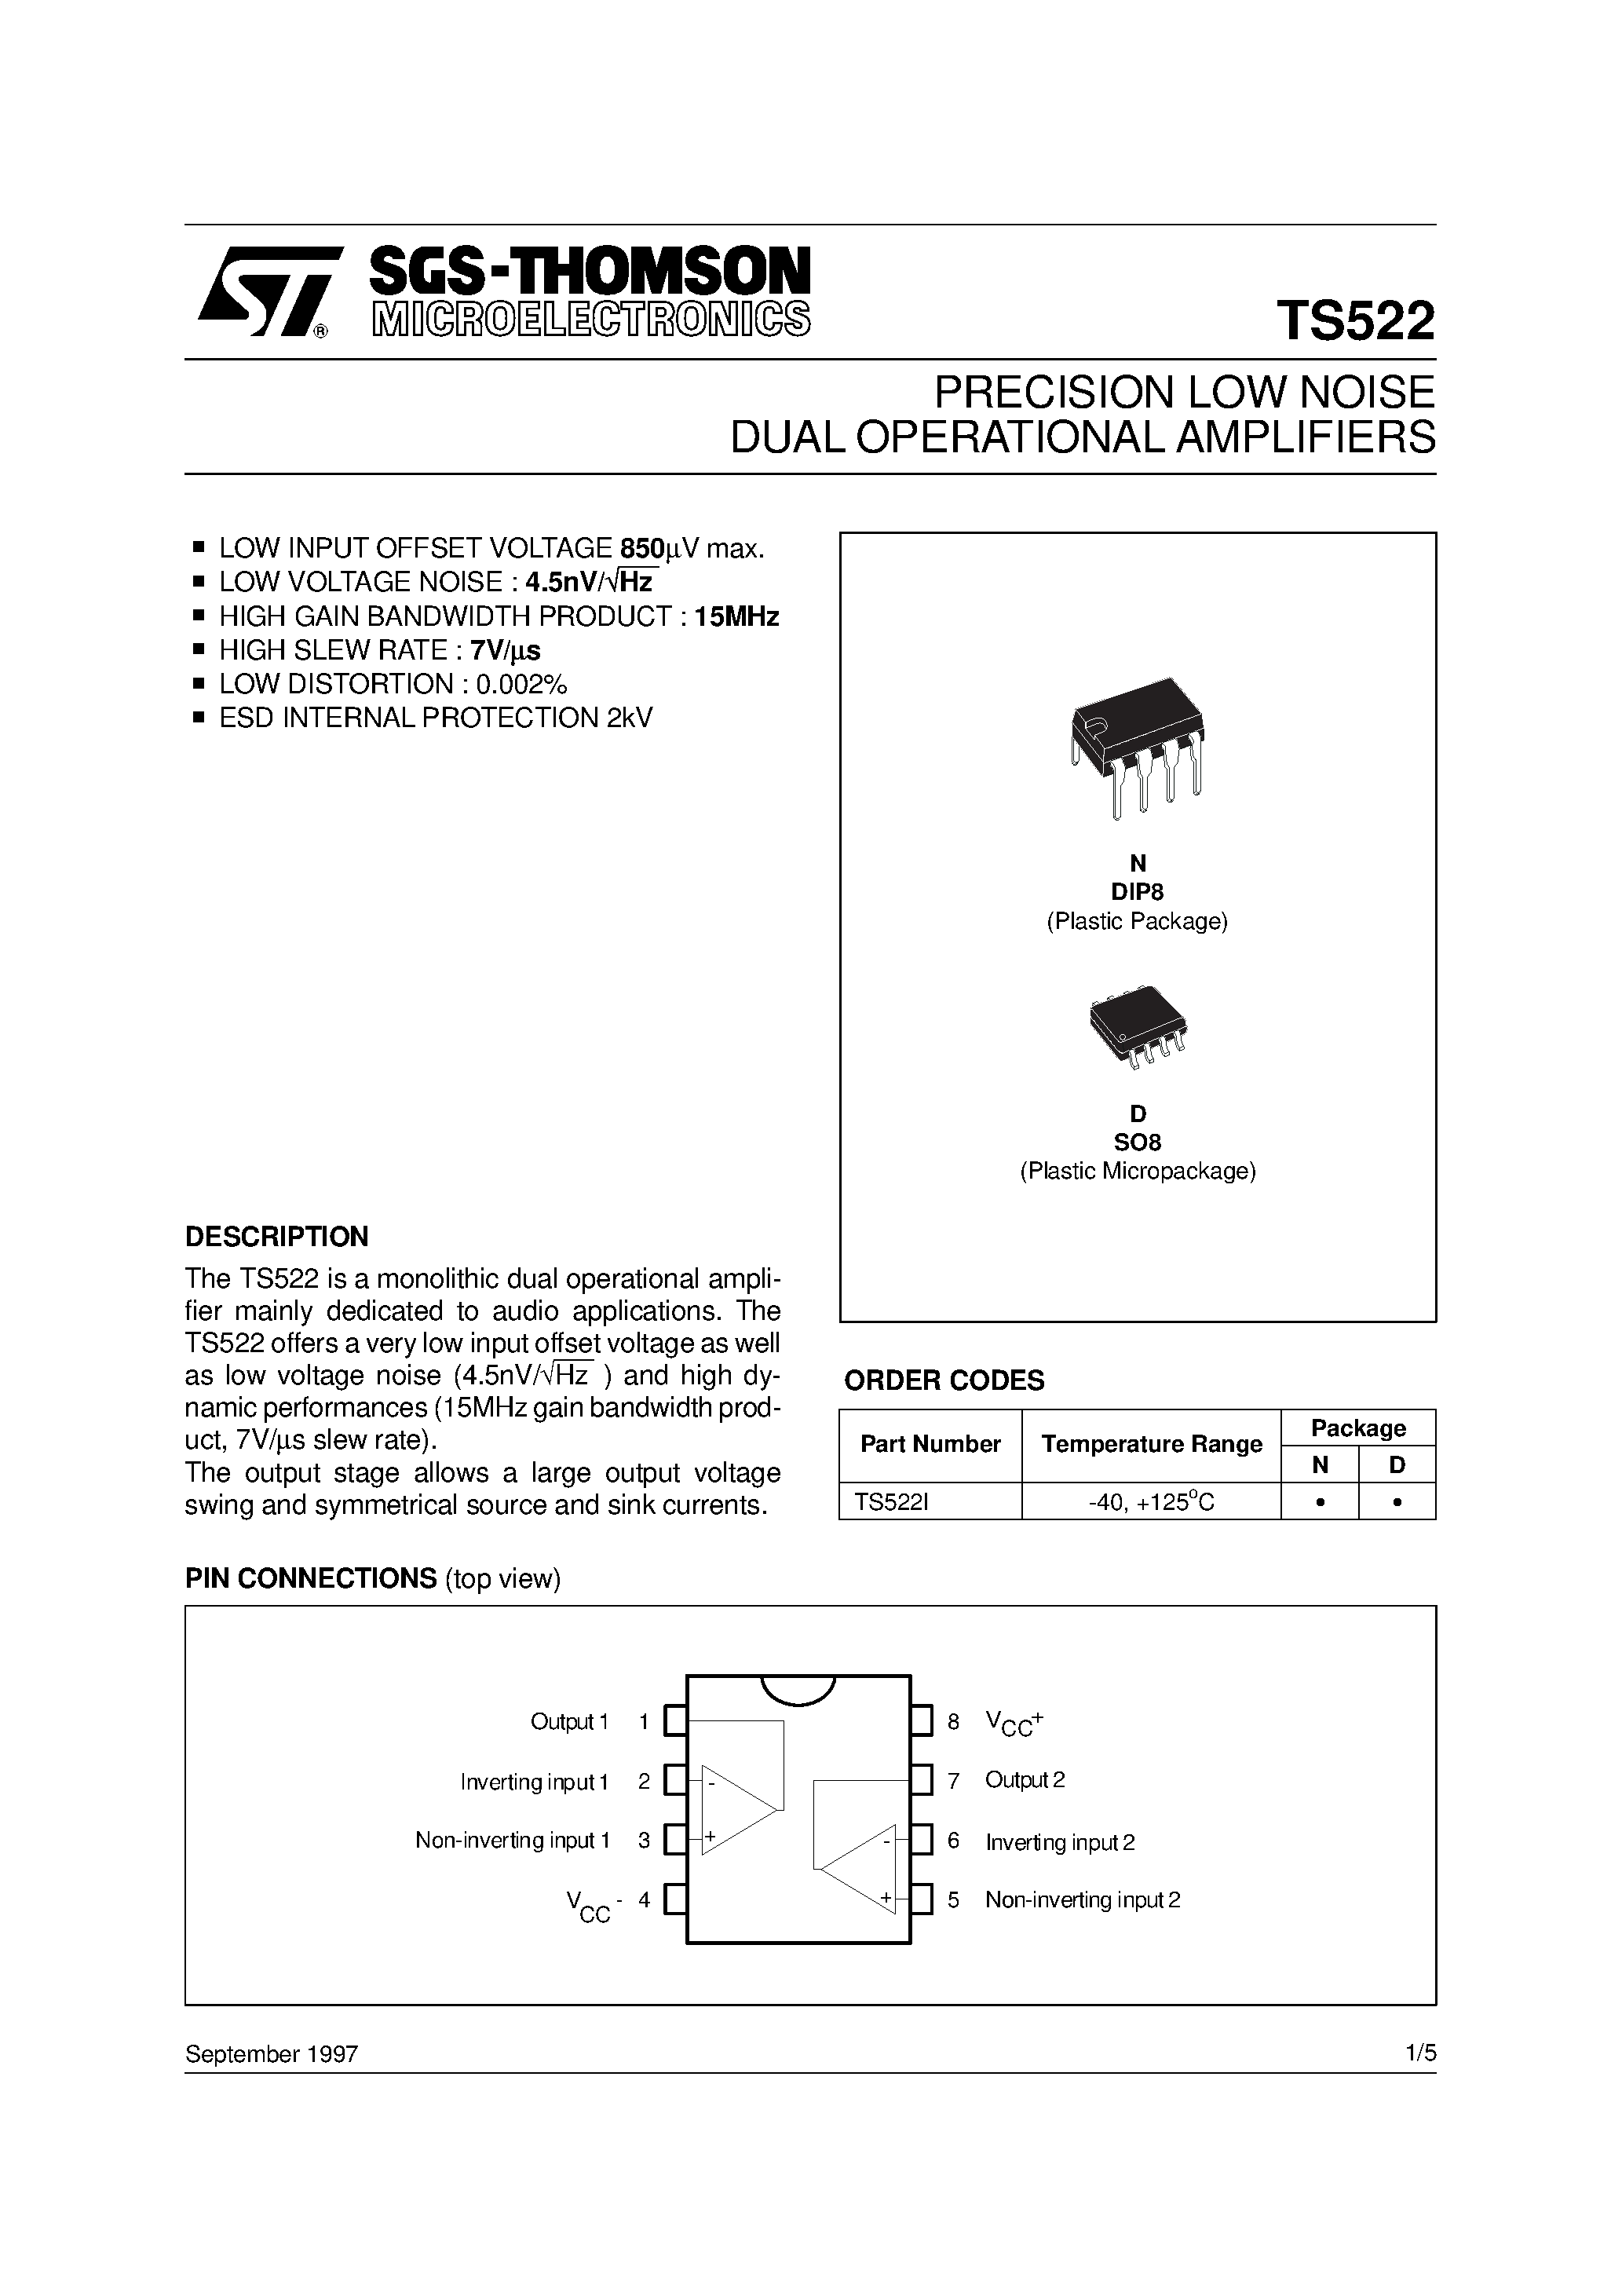 Datasheet TS522IN - PRECISION LOW NOISE DUAL OPERATIONAL AMPLIFIERS page 1